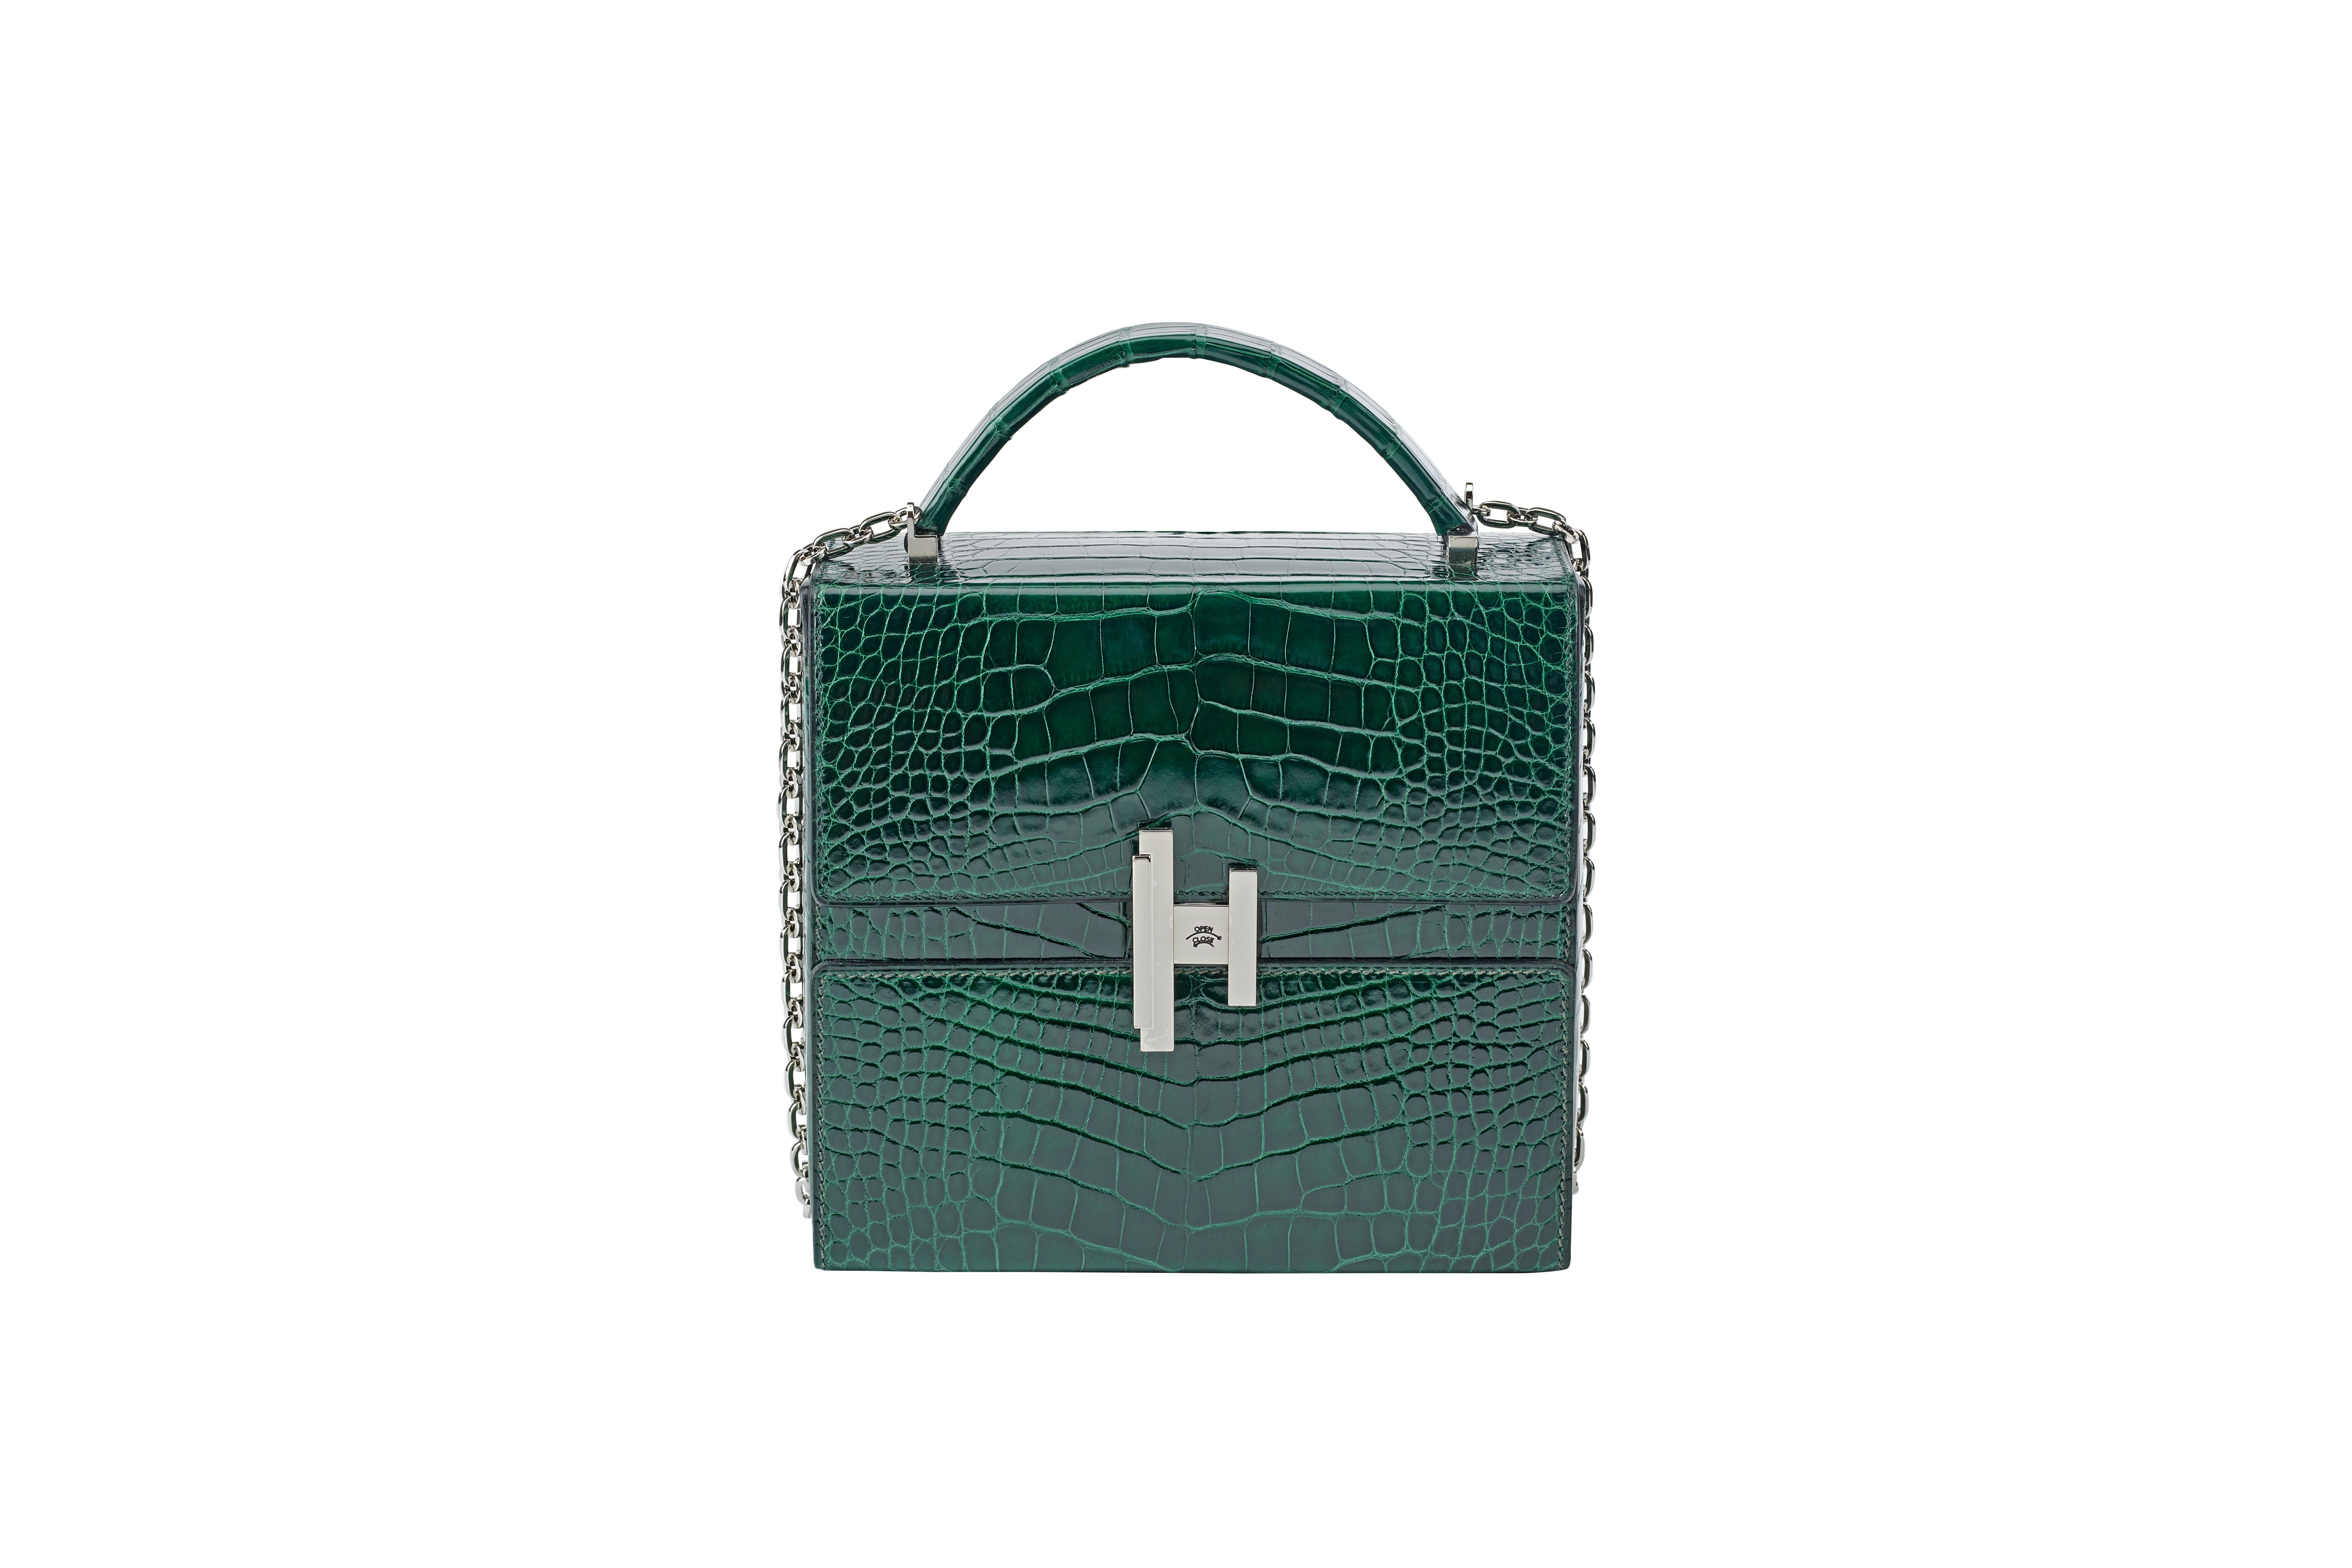 The newest model in the Hermès line, the Cinhetic has been all but impossible to find in stores. A slim, structural bag the Cinhetic lends itself perfectly to either casual day use or dressed up for evening.  

The bag featured here is made in deep